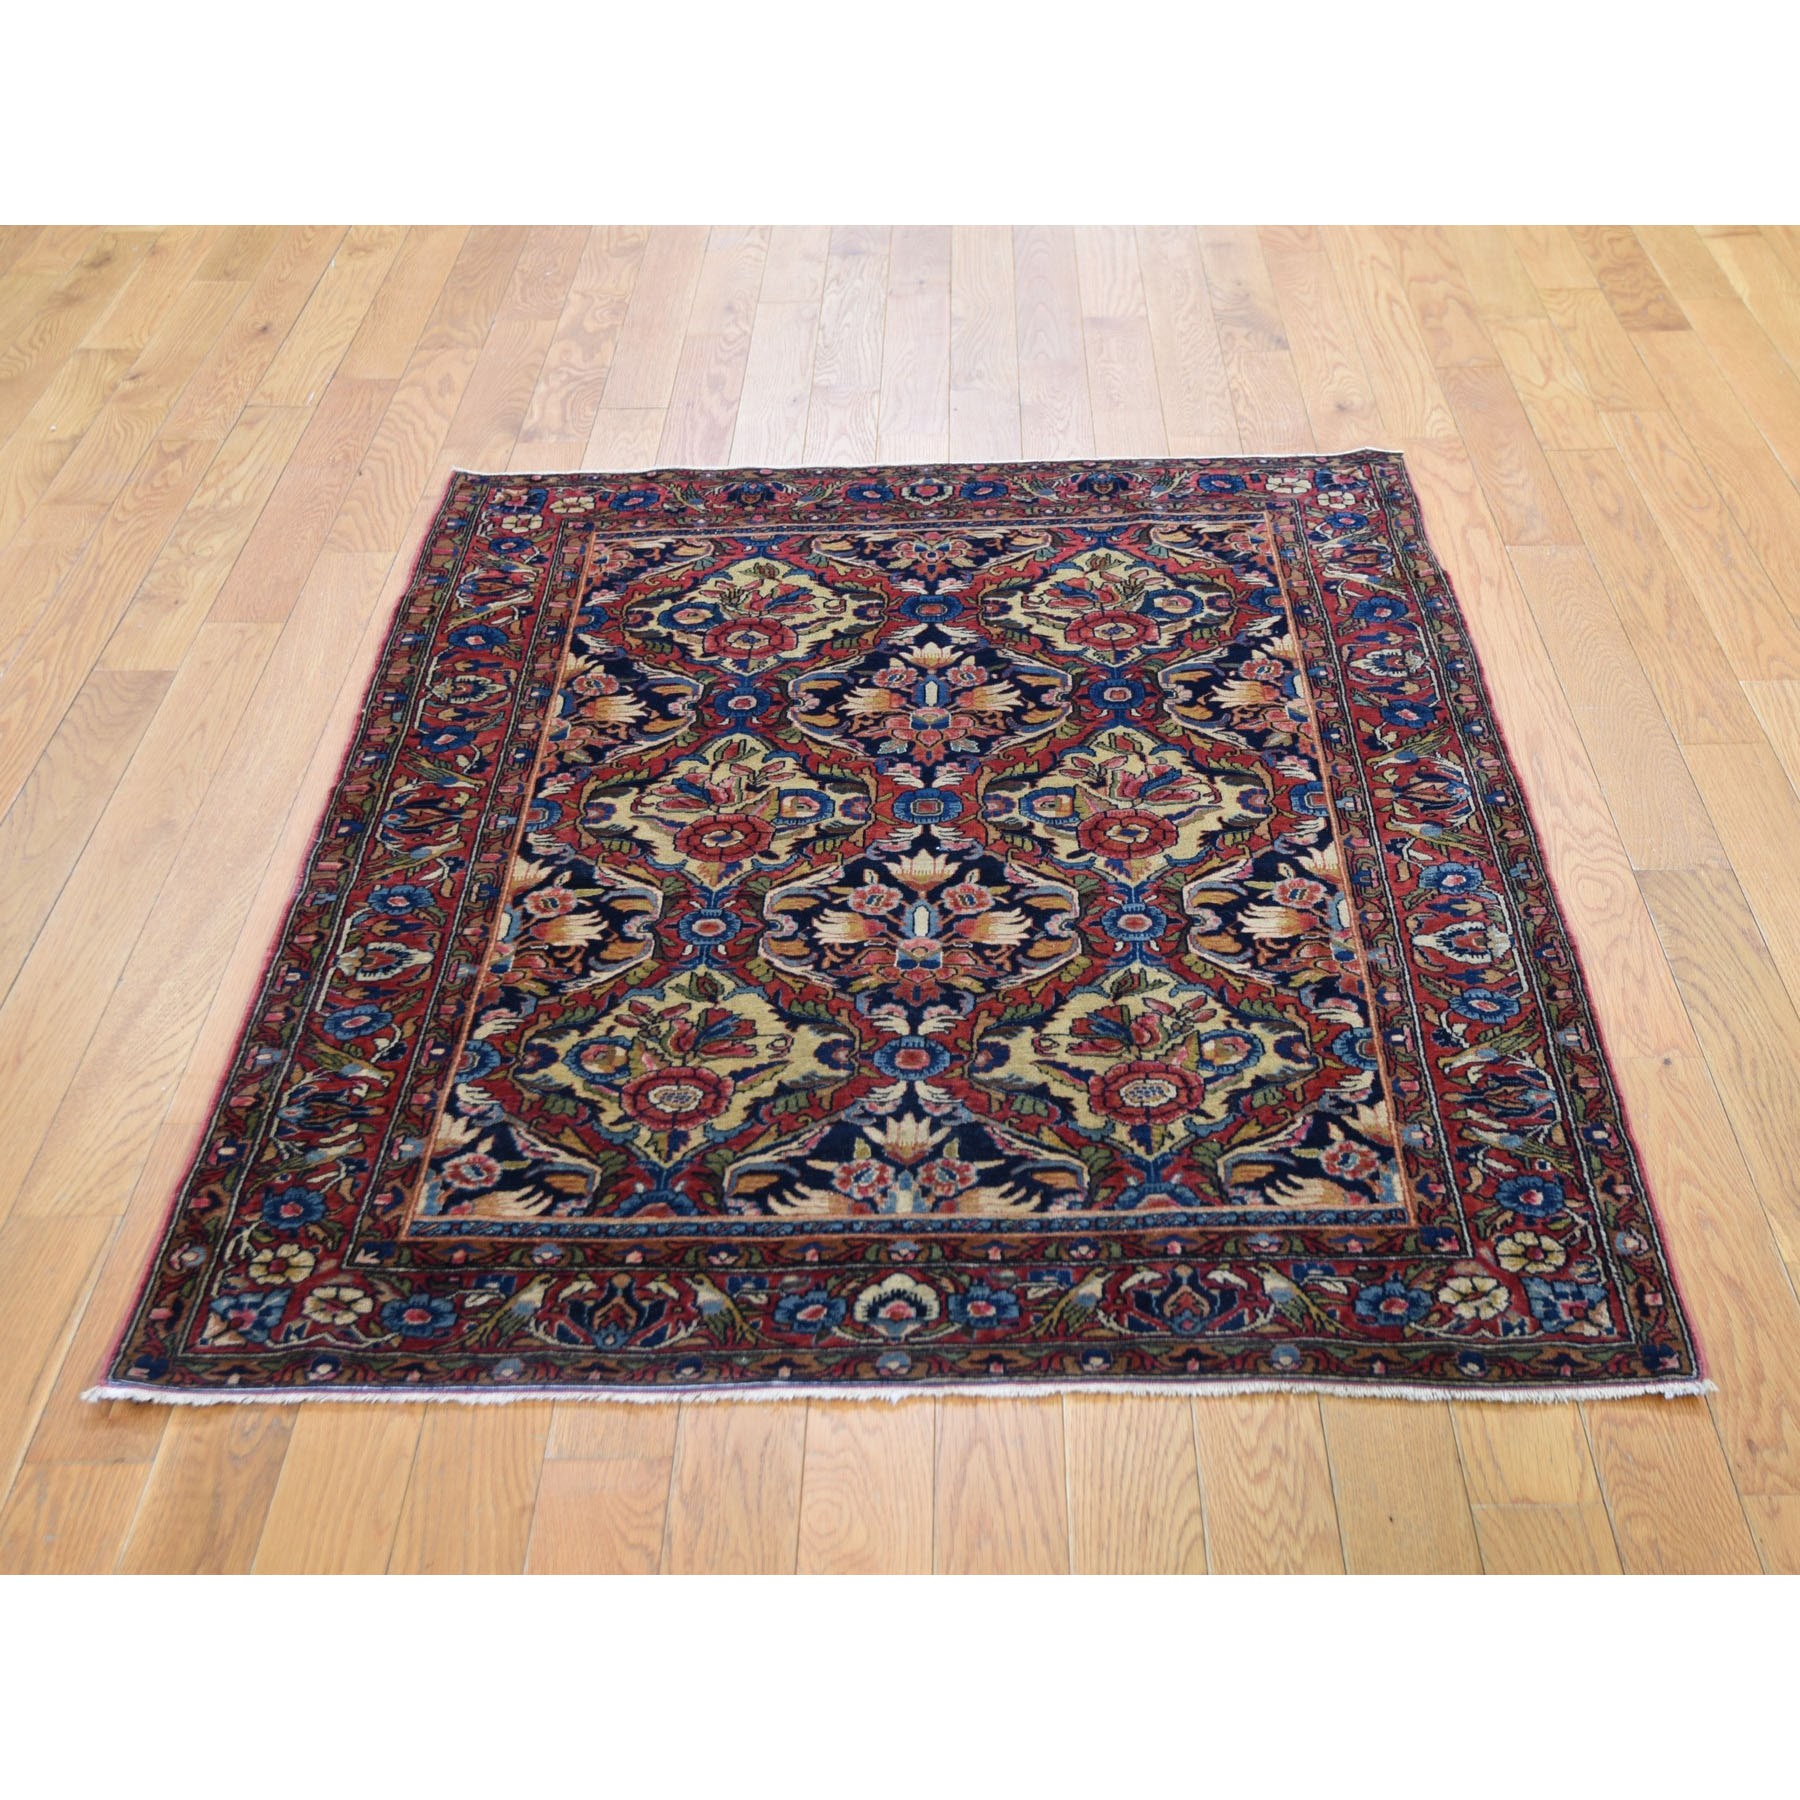 3-4 x4-10  Red Antique Persian Sarouk Exc Condition Soft Full Pile Hand Knotted Oriental Rug 